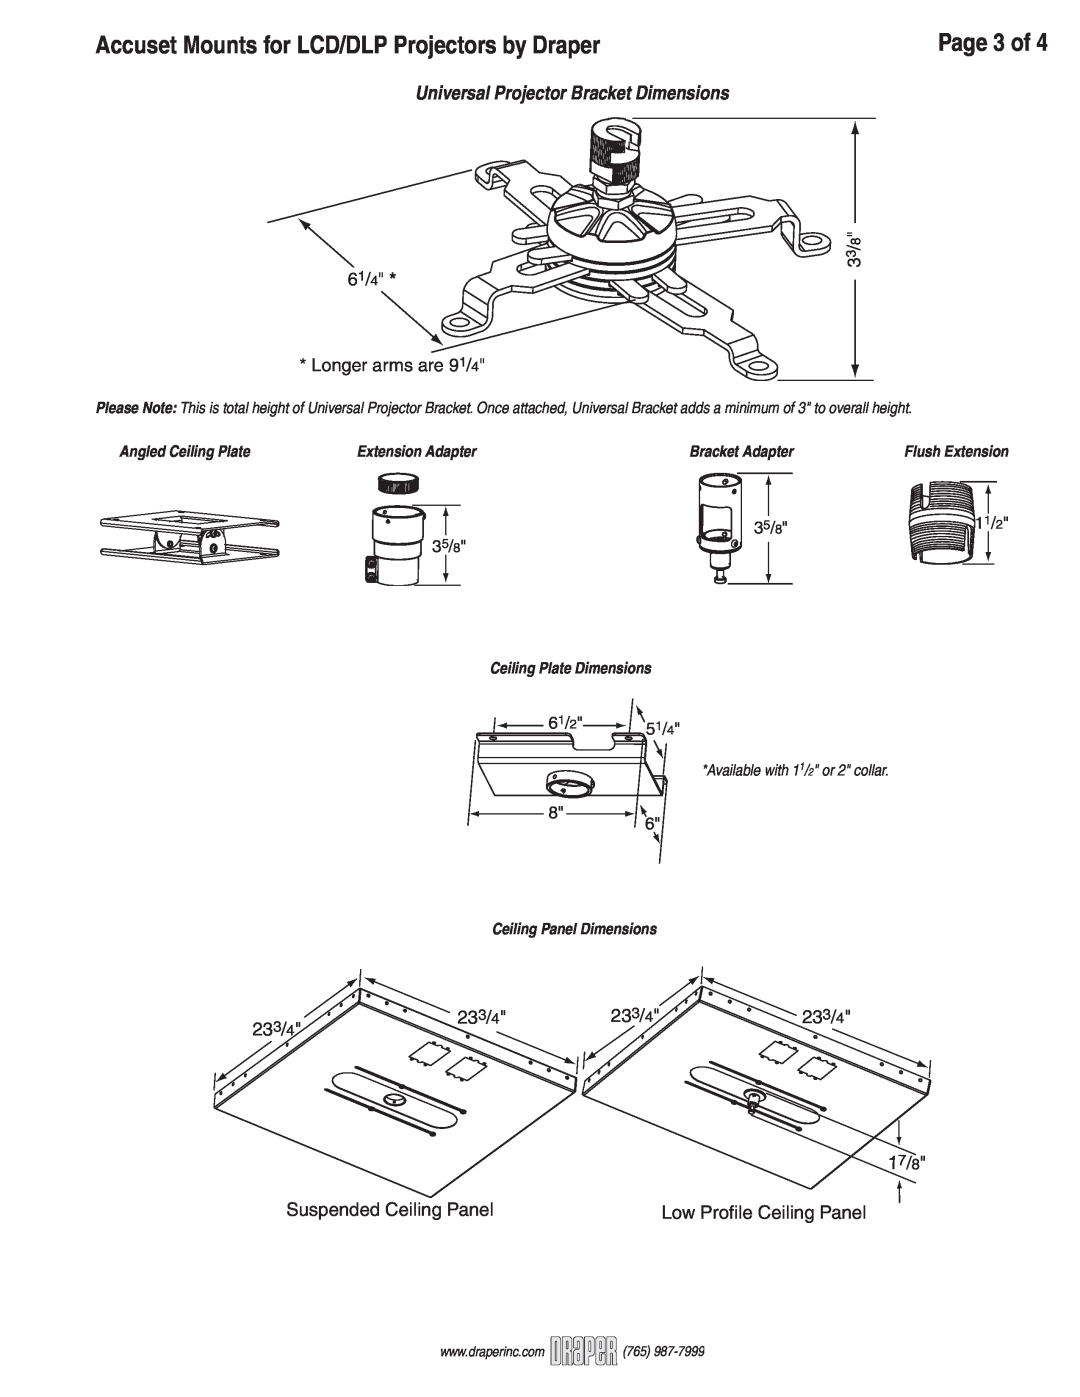 Draper LCD-DLP Projectors Page 3 of, Universal Projector Bracket Dimensions, 35/811/2 35/8, 61/2 51/4, Extension Adapter 